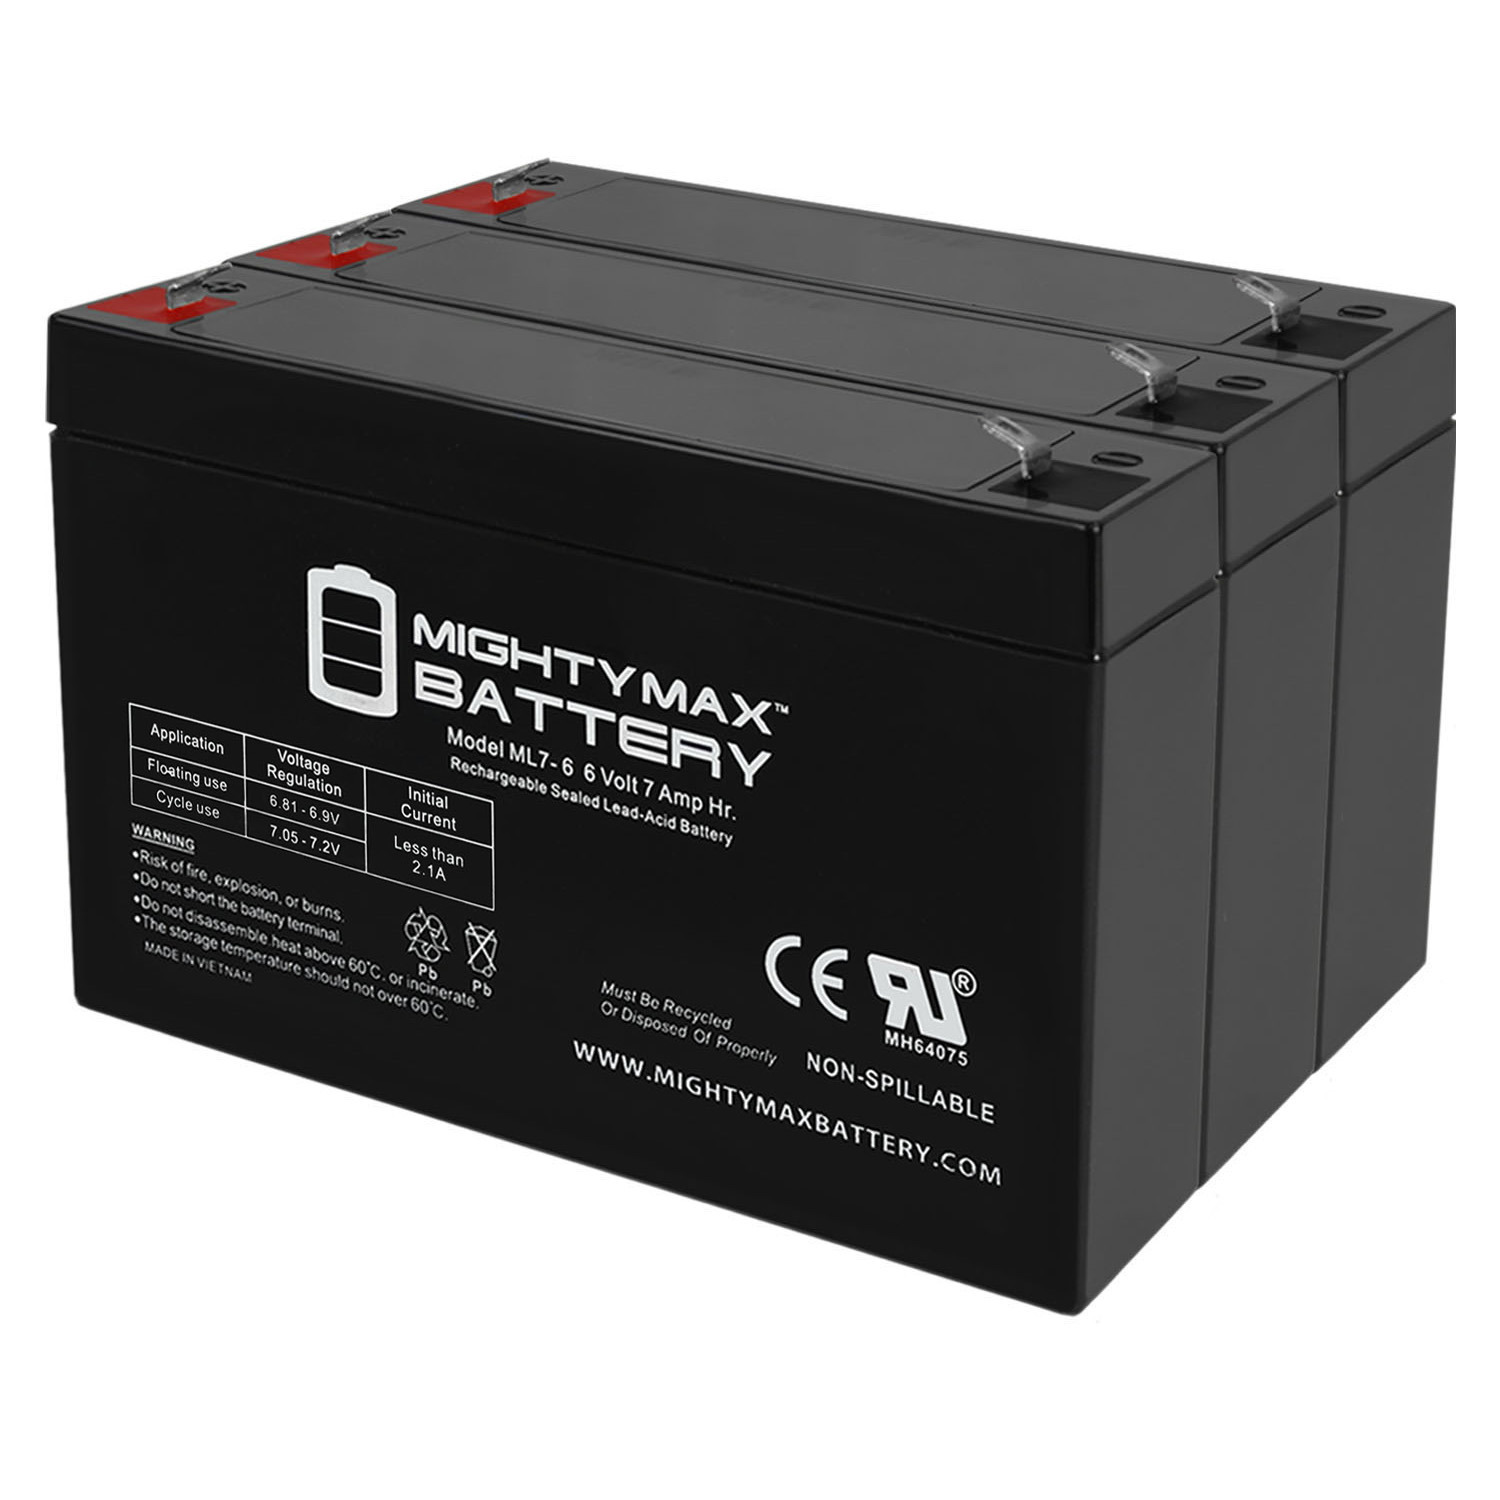 6V 7Ah SLA Battery Replacement for Kids Ride on Toy SB670 - 3 Pack